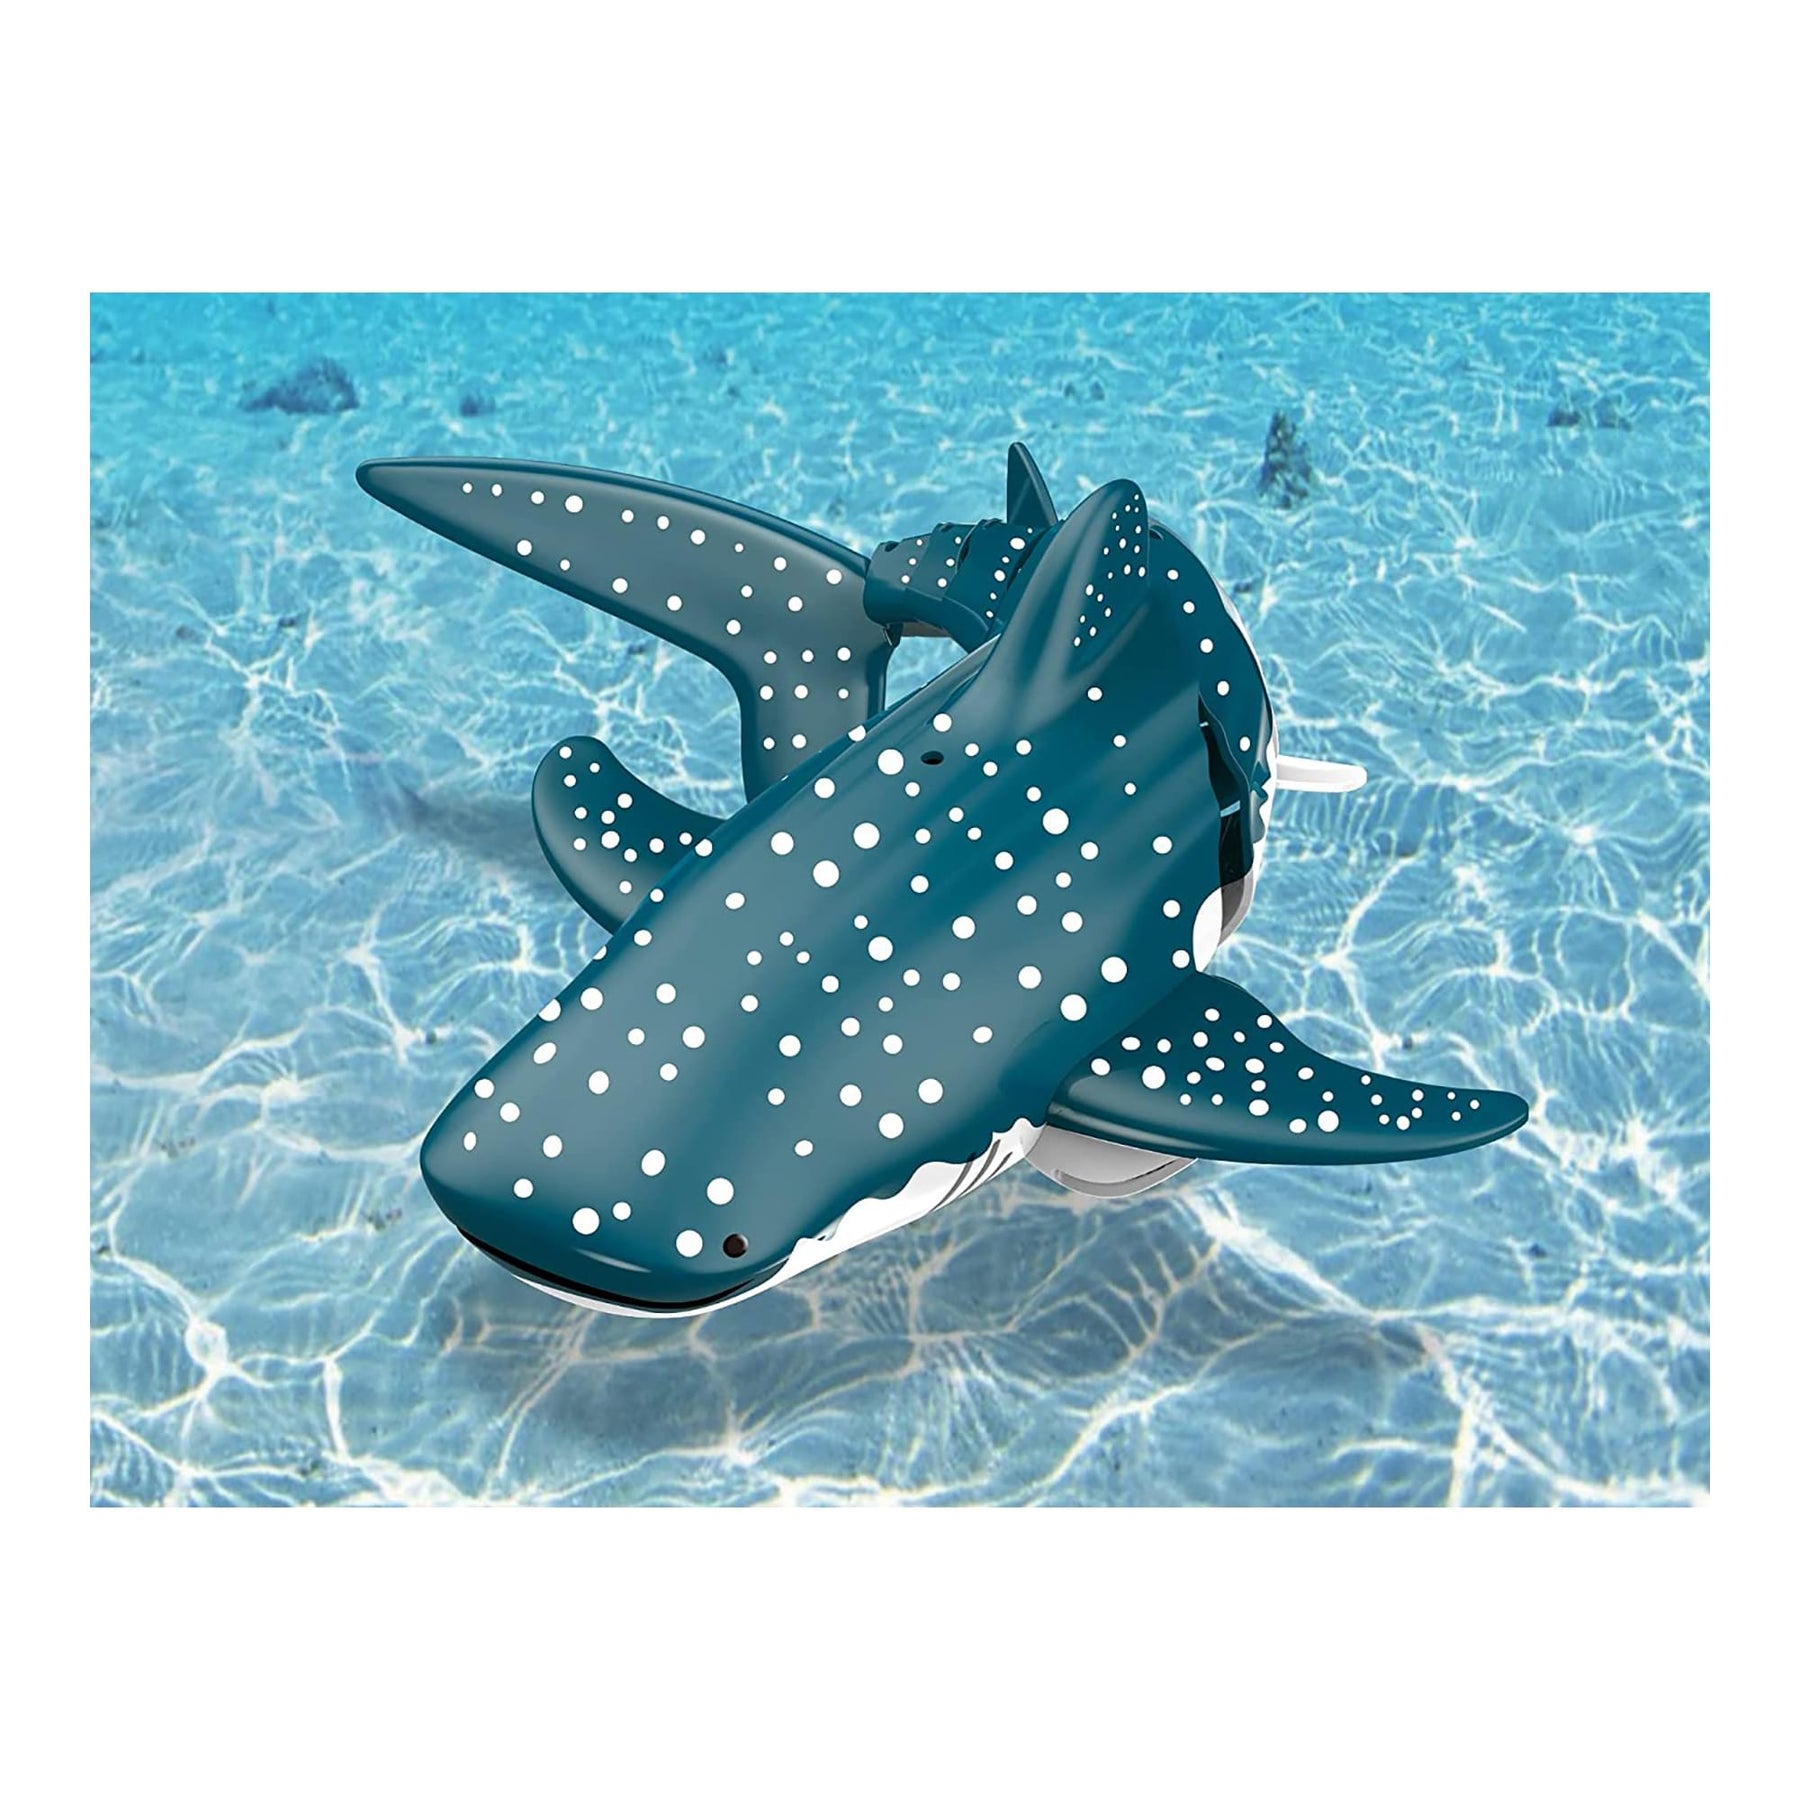 RoboWhaleShark 2.4G Remote Control Water Toy